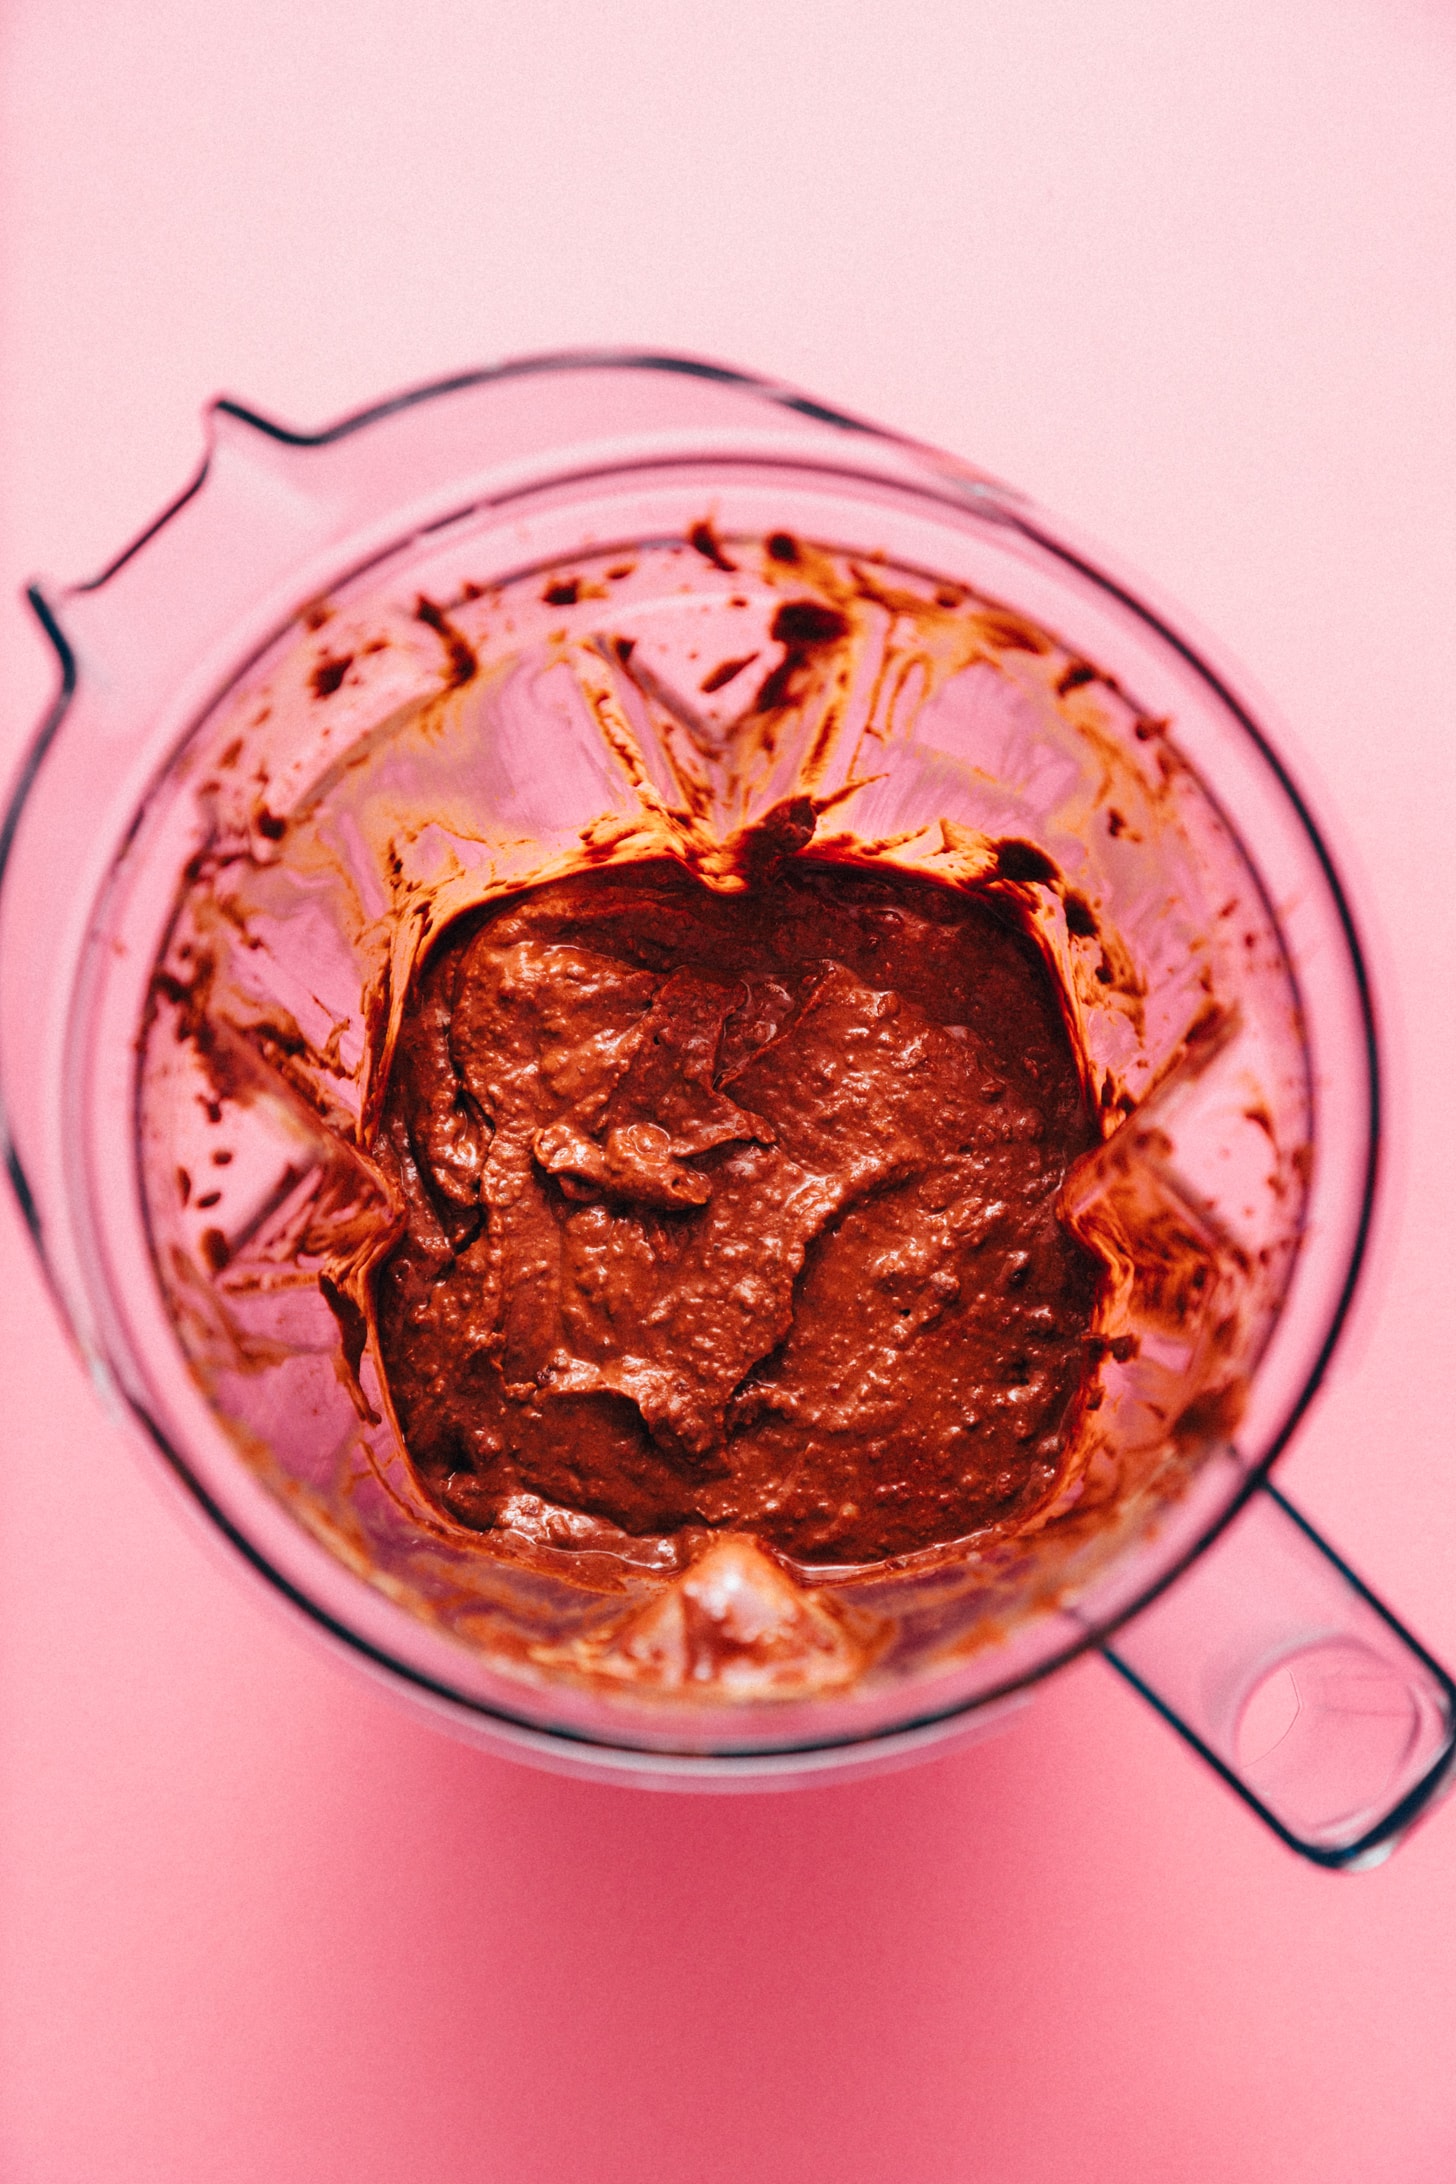 Freshly blended Vegan Chocolate Protein Pudding made with black beans